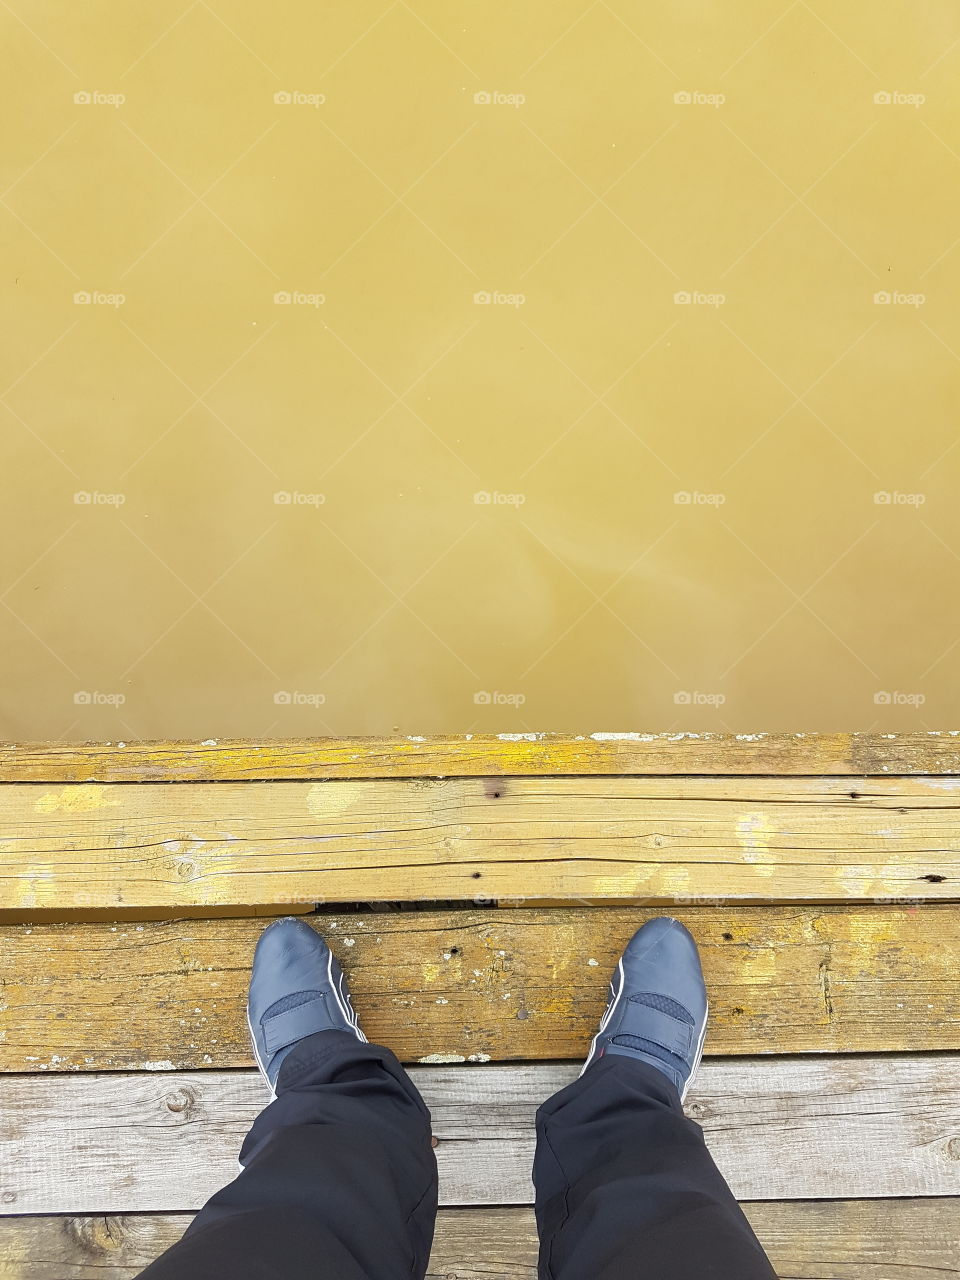 man standing on the edge of the lake dock